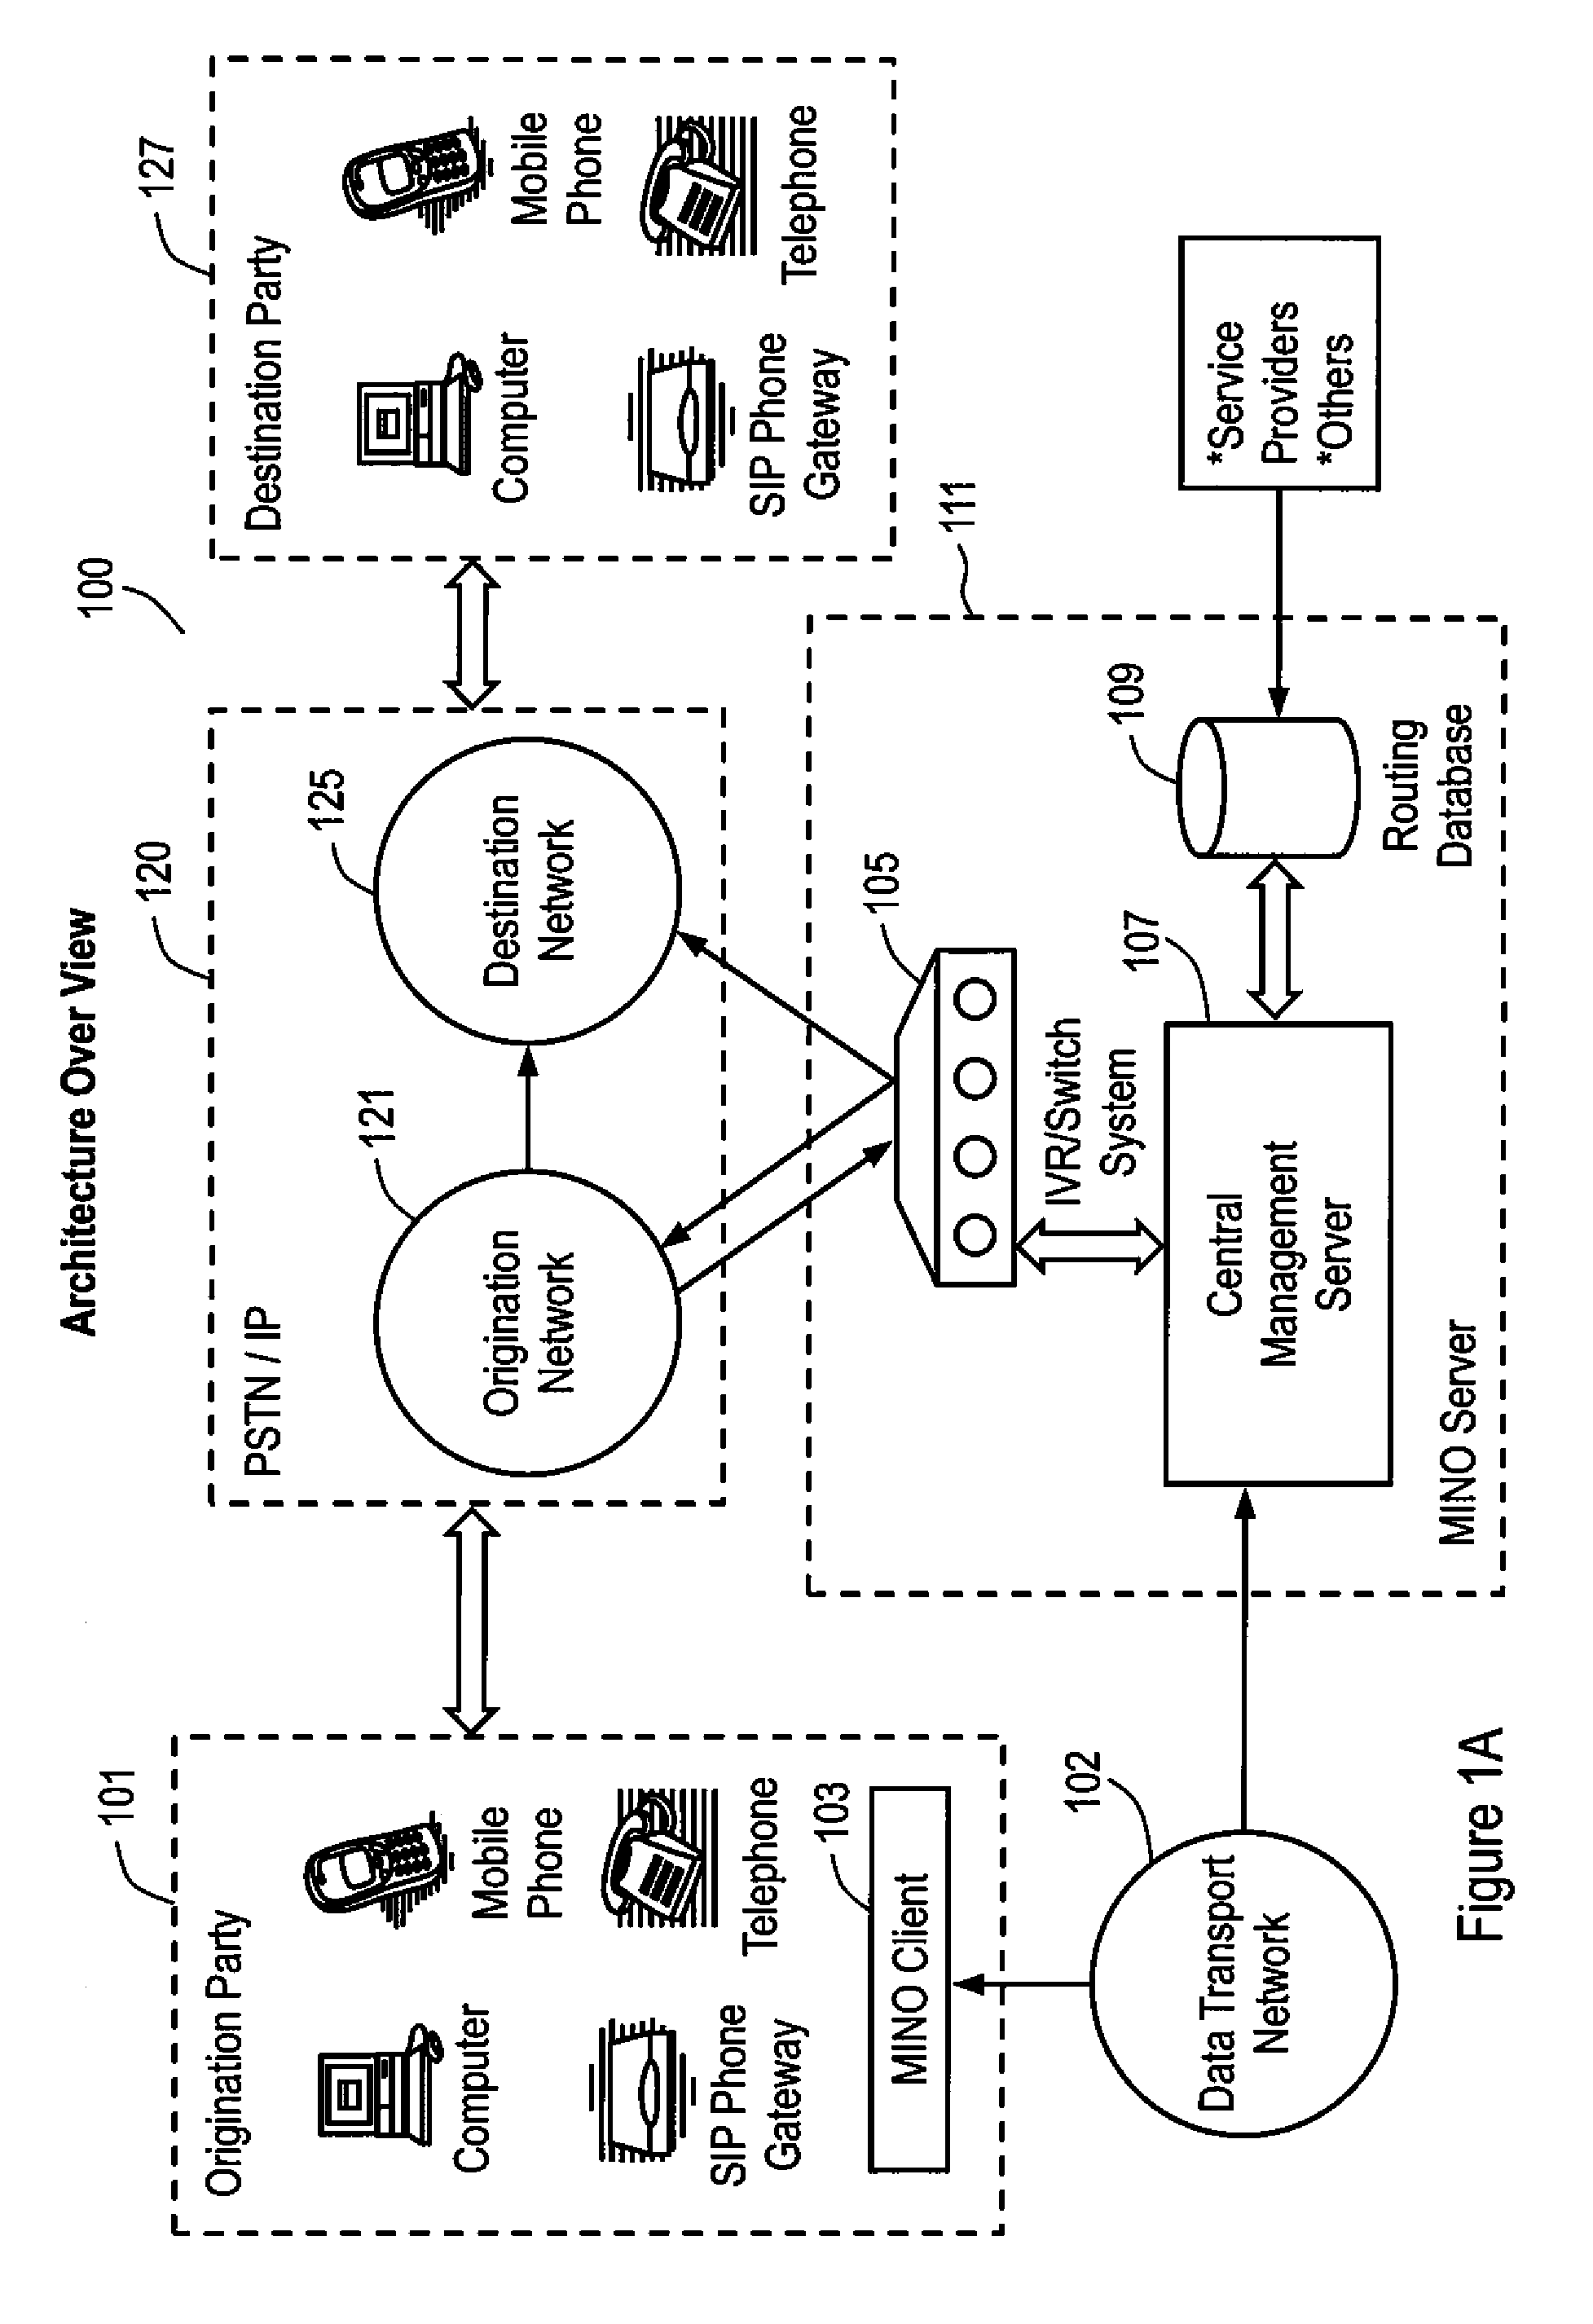 Method and System for Processing International Calls Using a Voice Over IP Process